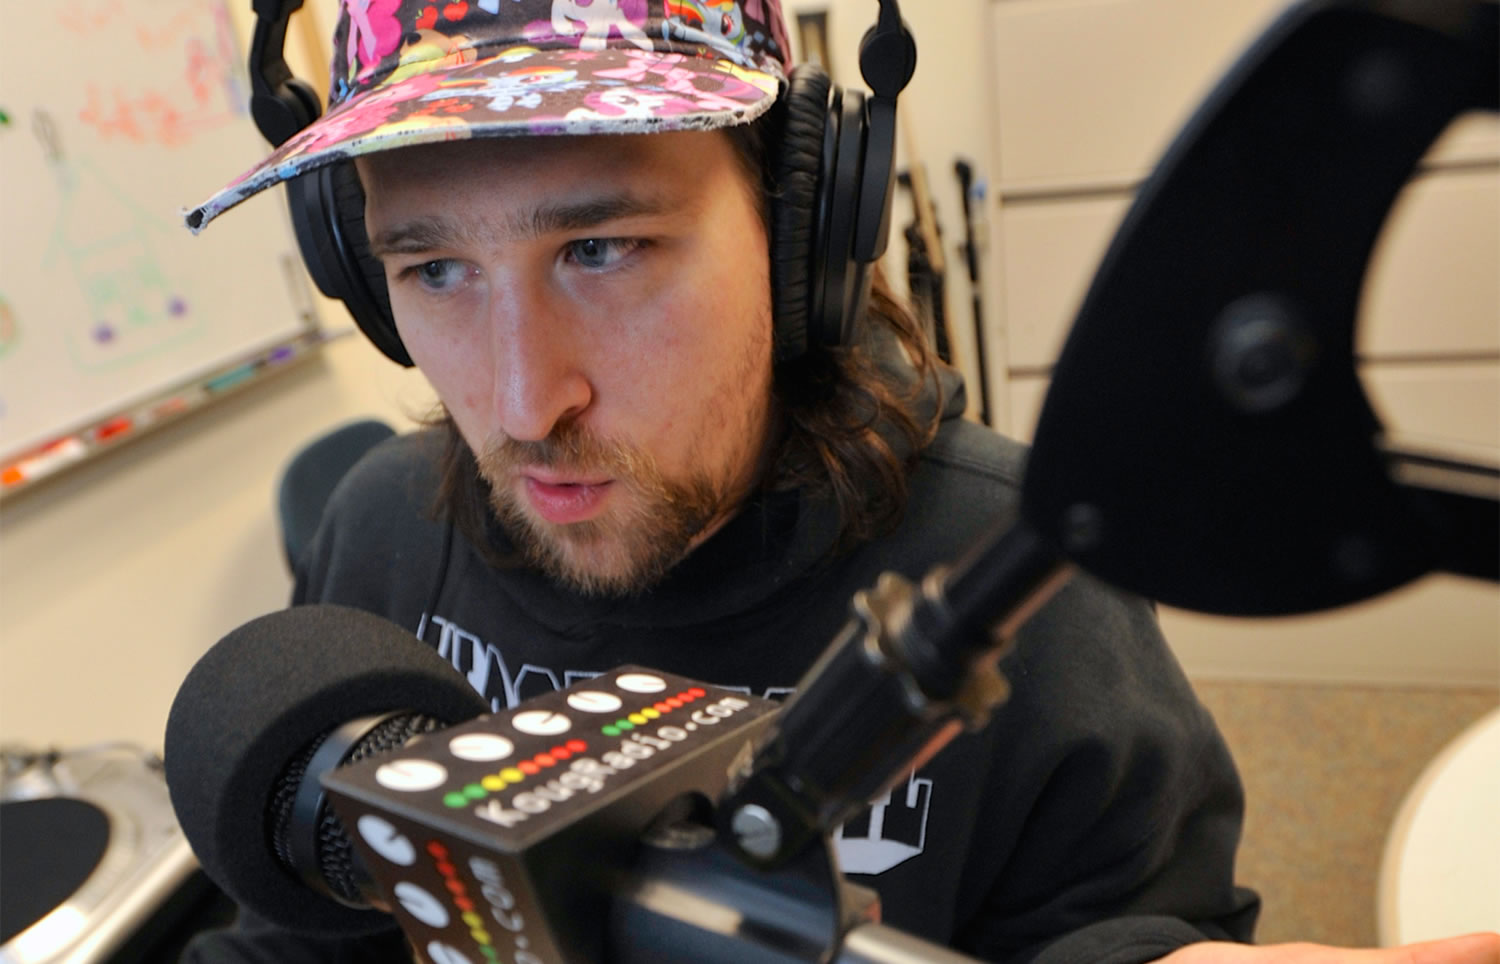 Aaron McPherson, also known as “DJMC,” is a DJ at Washington State University Vancouver’s KOUG radio station. The station is broadcast exclusively online and staffed by students.